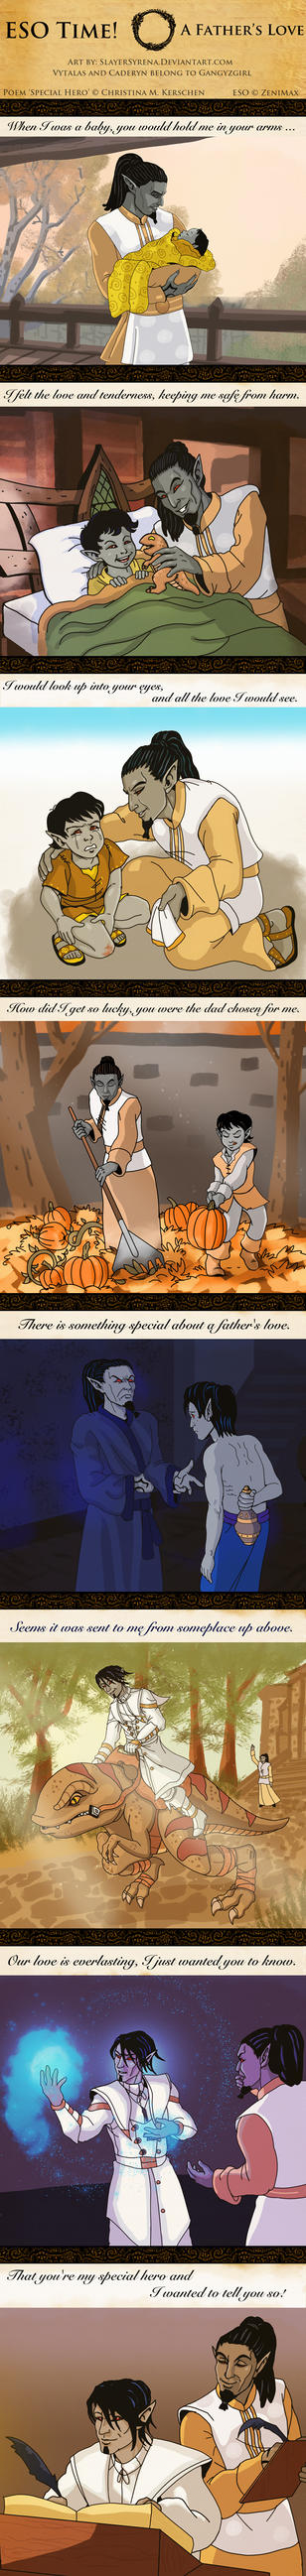 eso_time__a_father_s_love_by_slayersyrena-dbdfof8.jpg